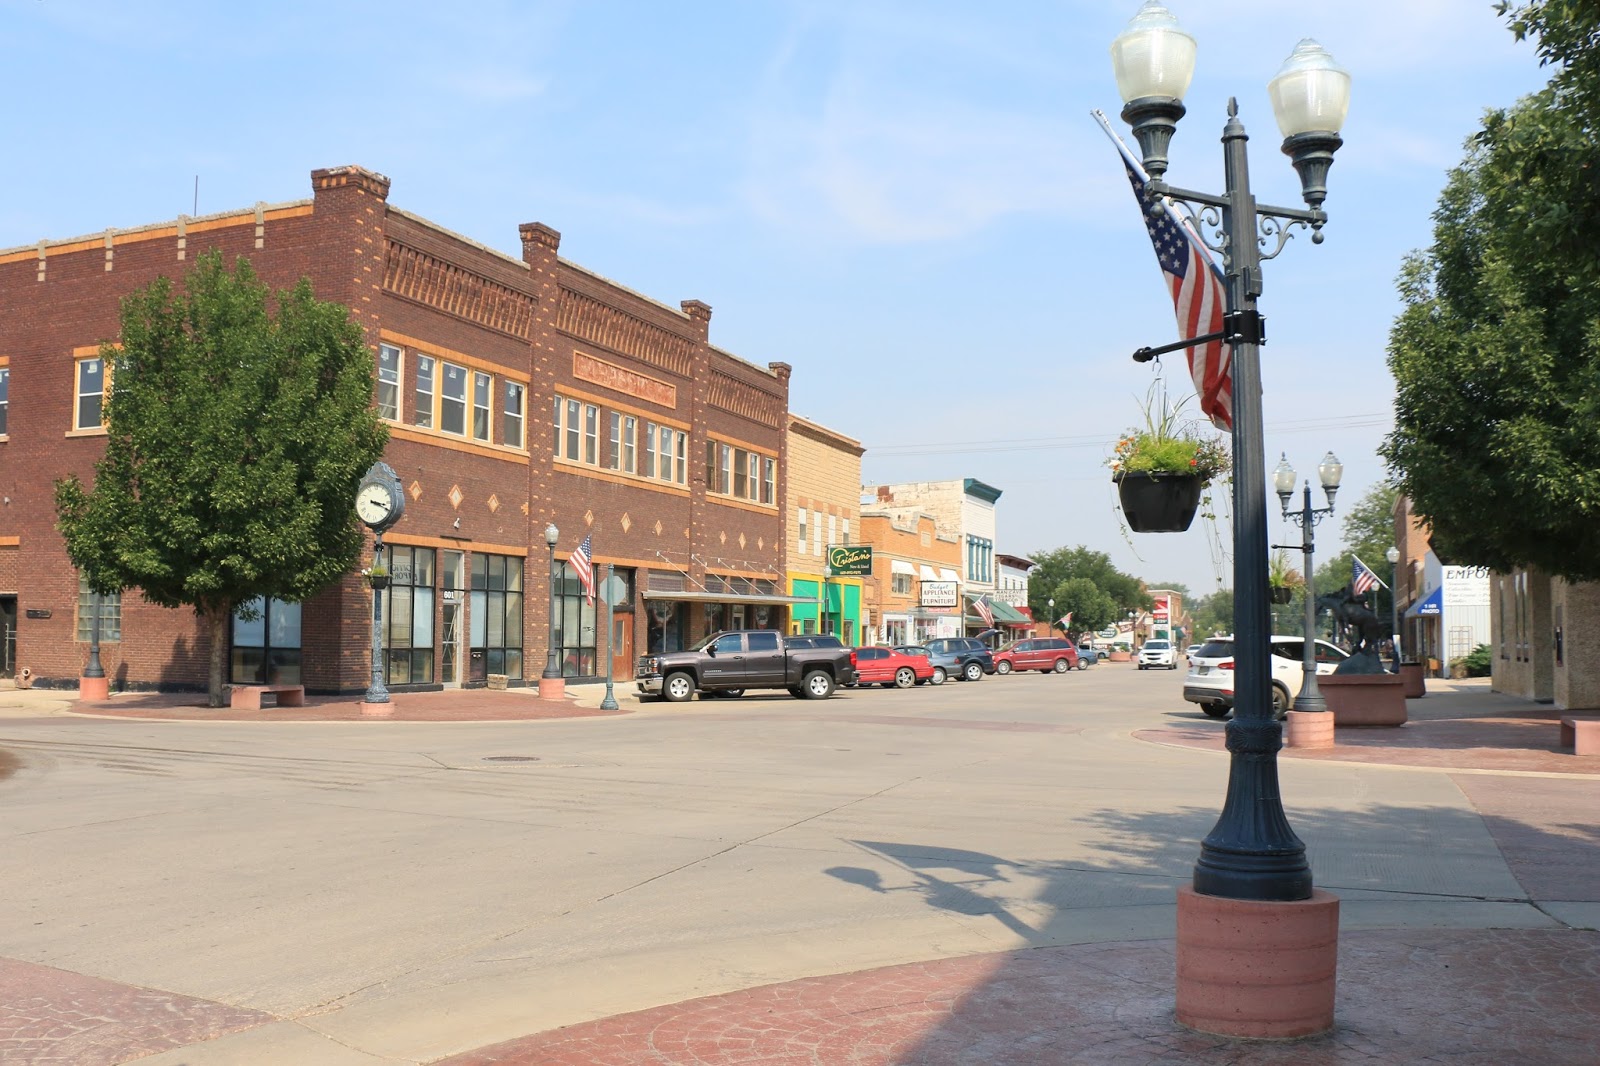 travels-with-twinkles-belle-fourche-and-rapid-city-south-dakota